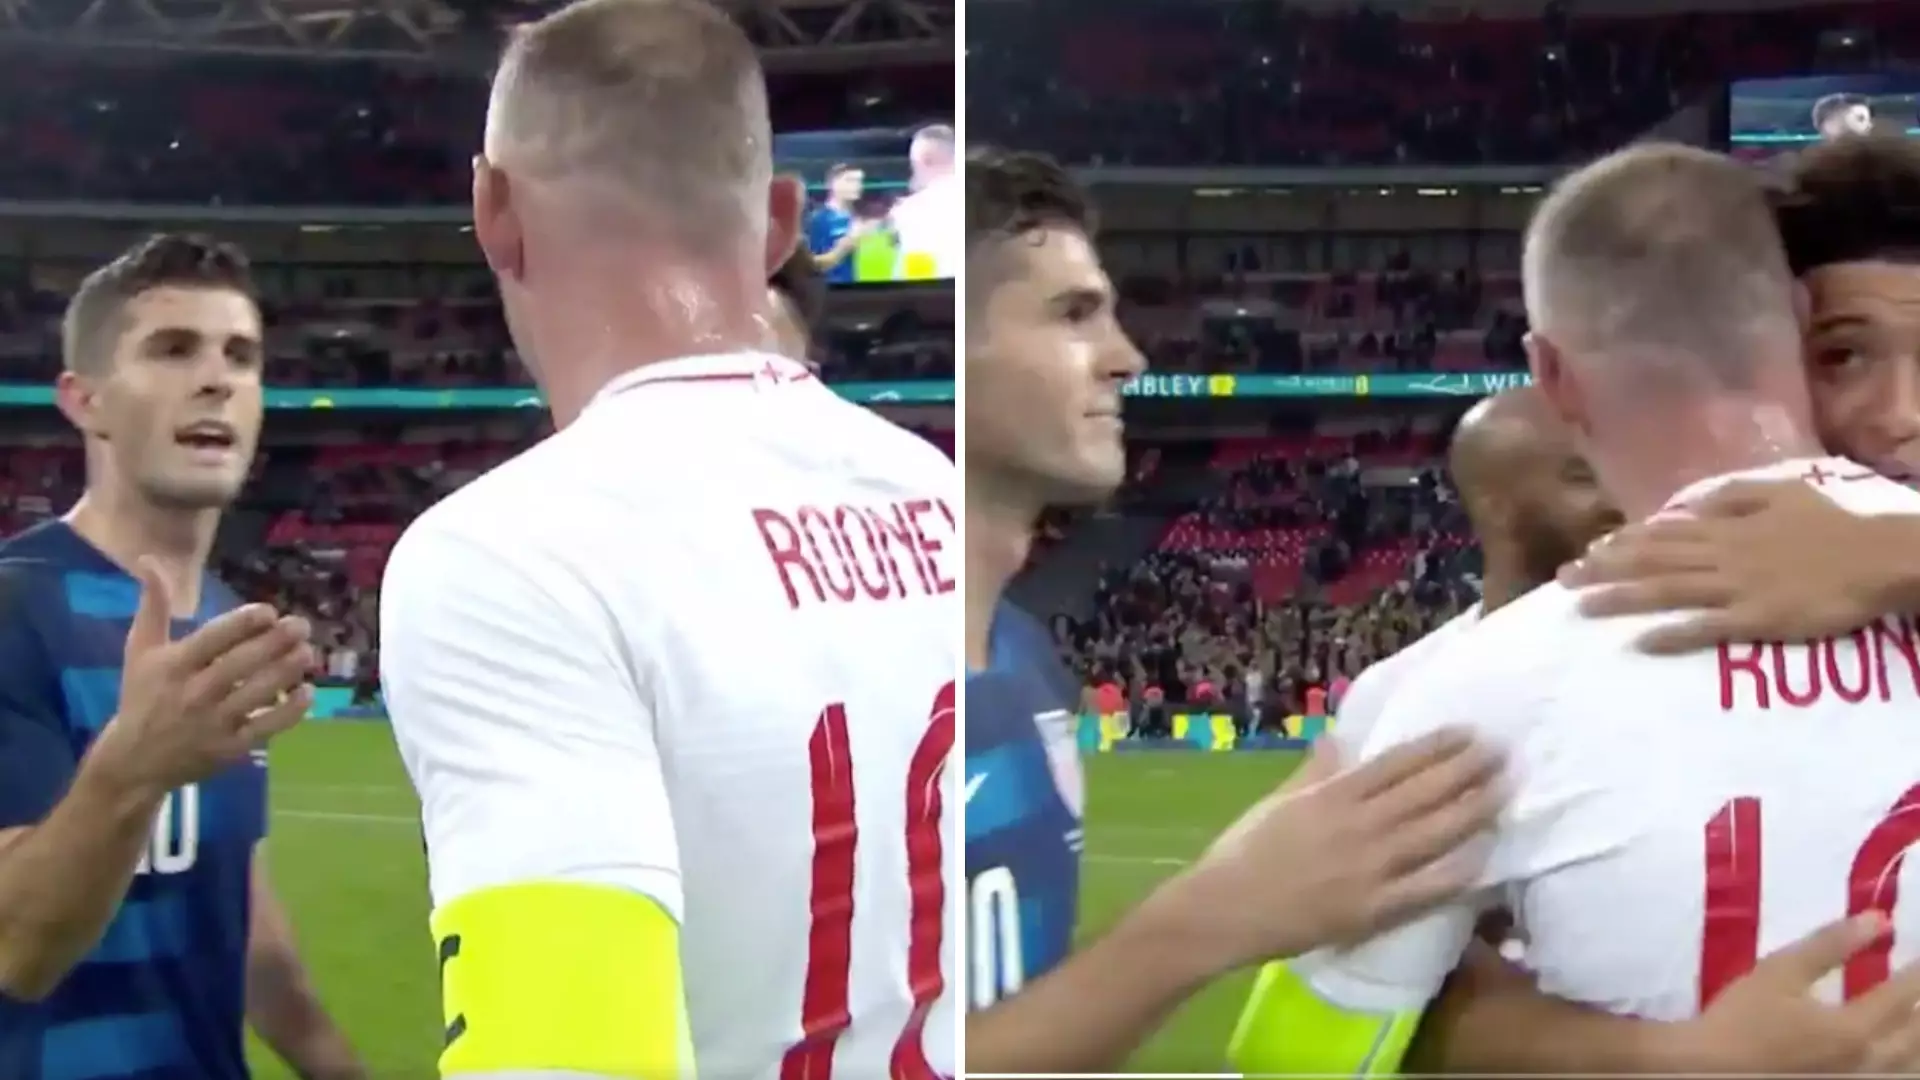 Wayne Rooney Brutally Custard Pies Chelsea Target Christian Pulisic After England Match